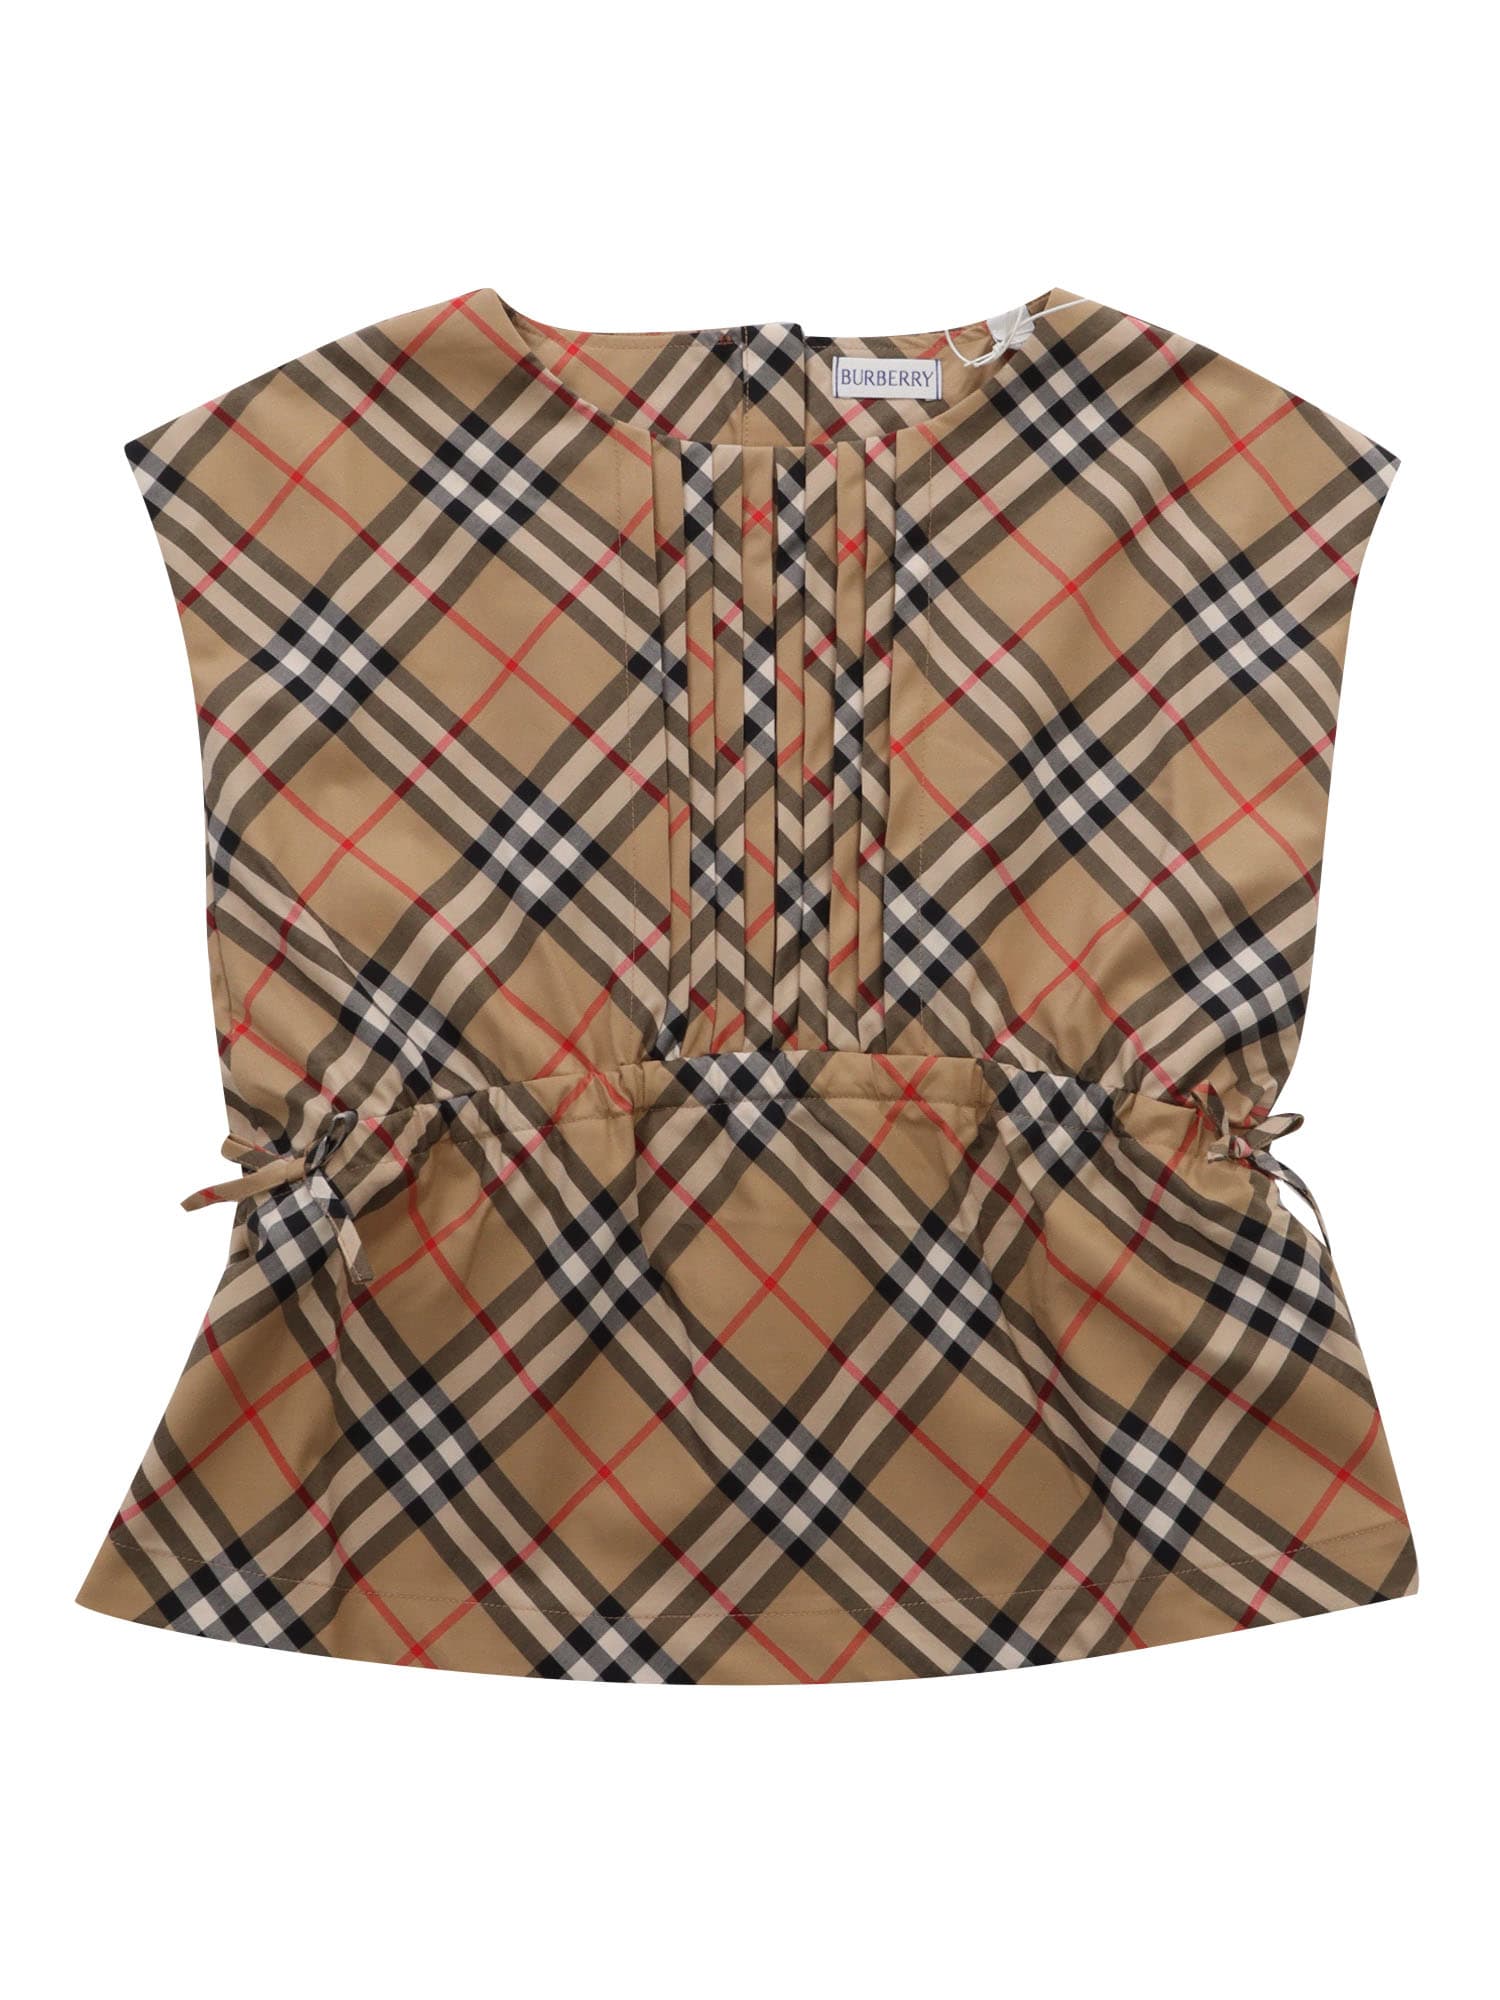 Burberry Kids' Top With Check Print In Beige